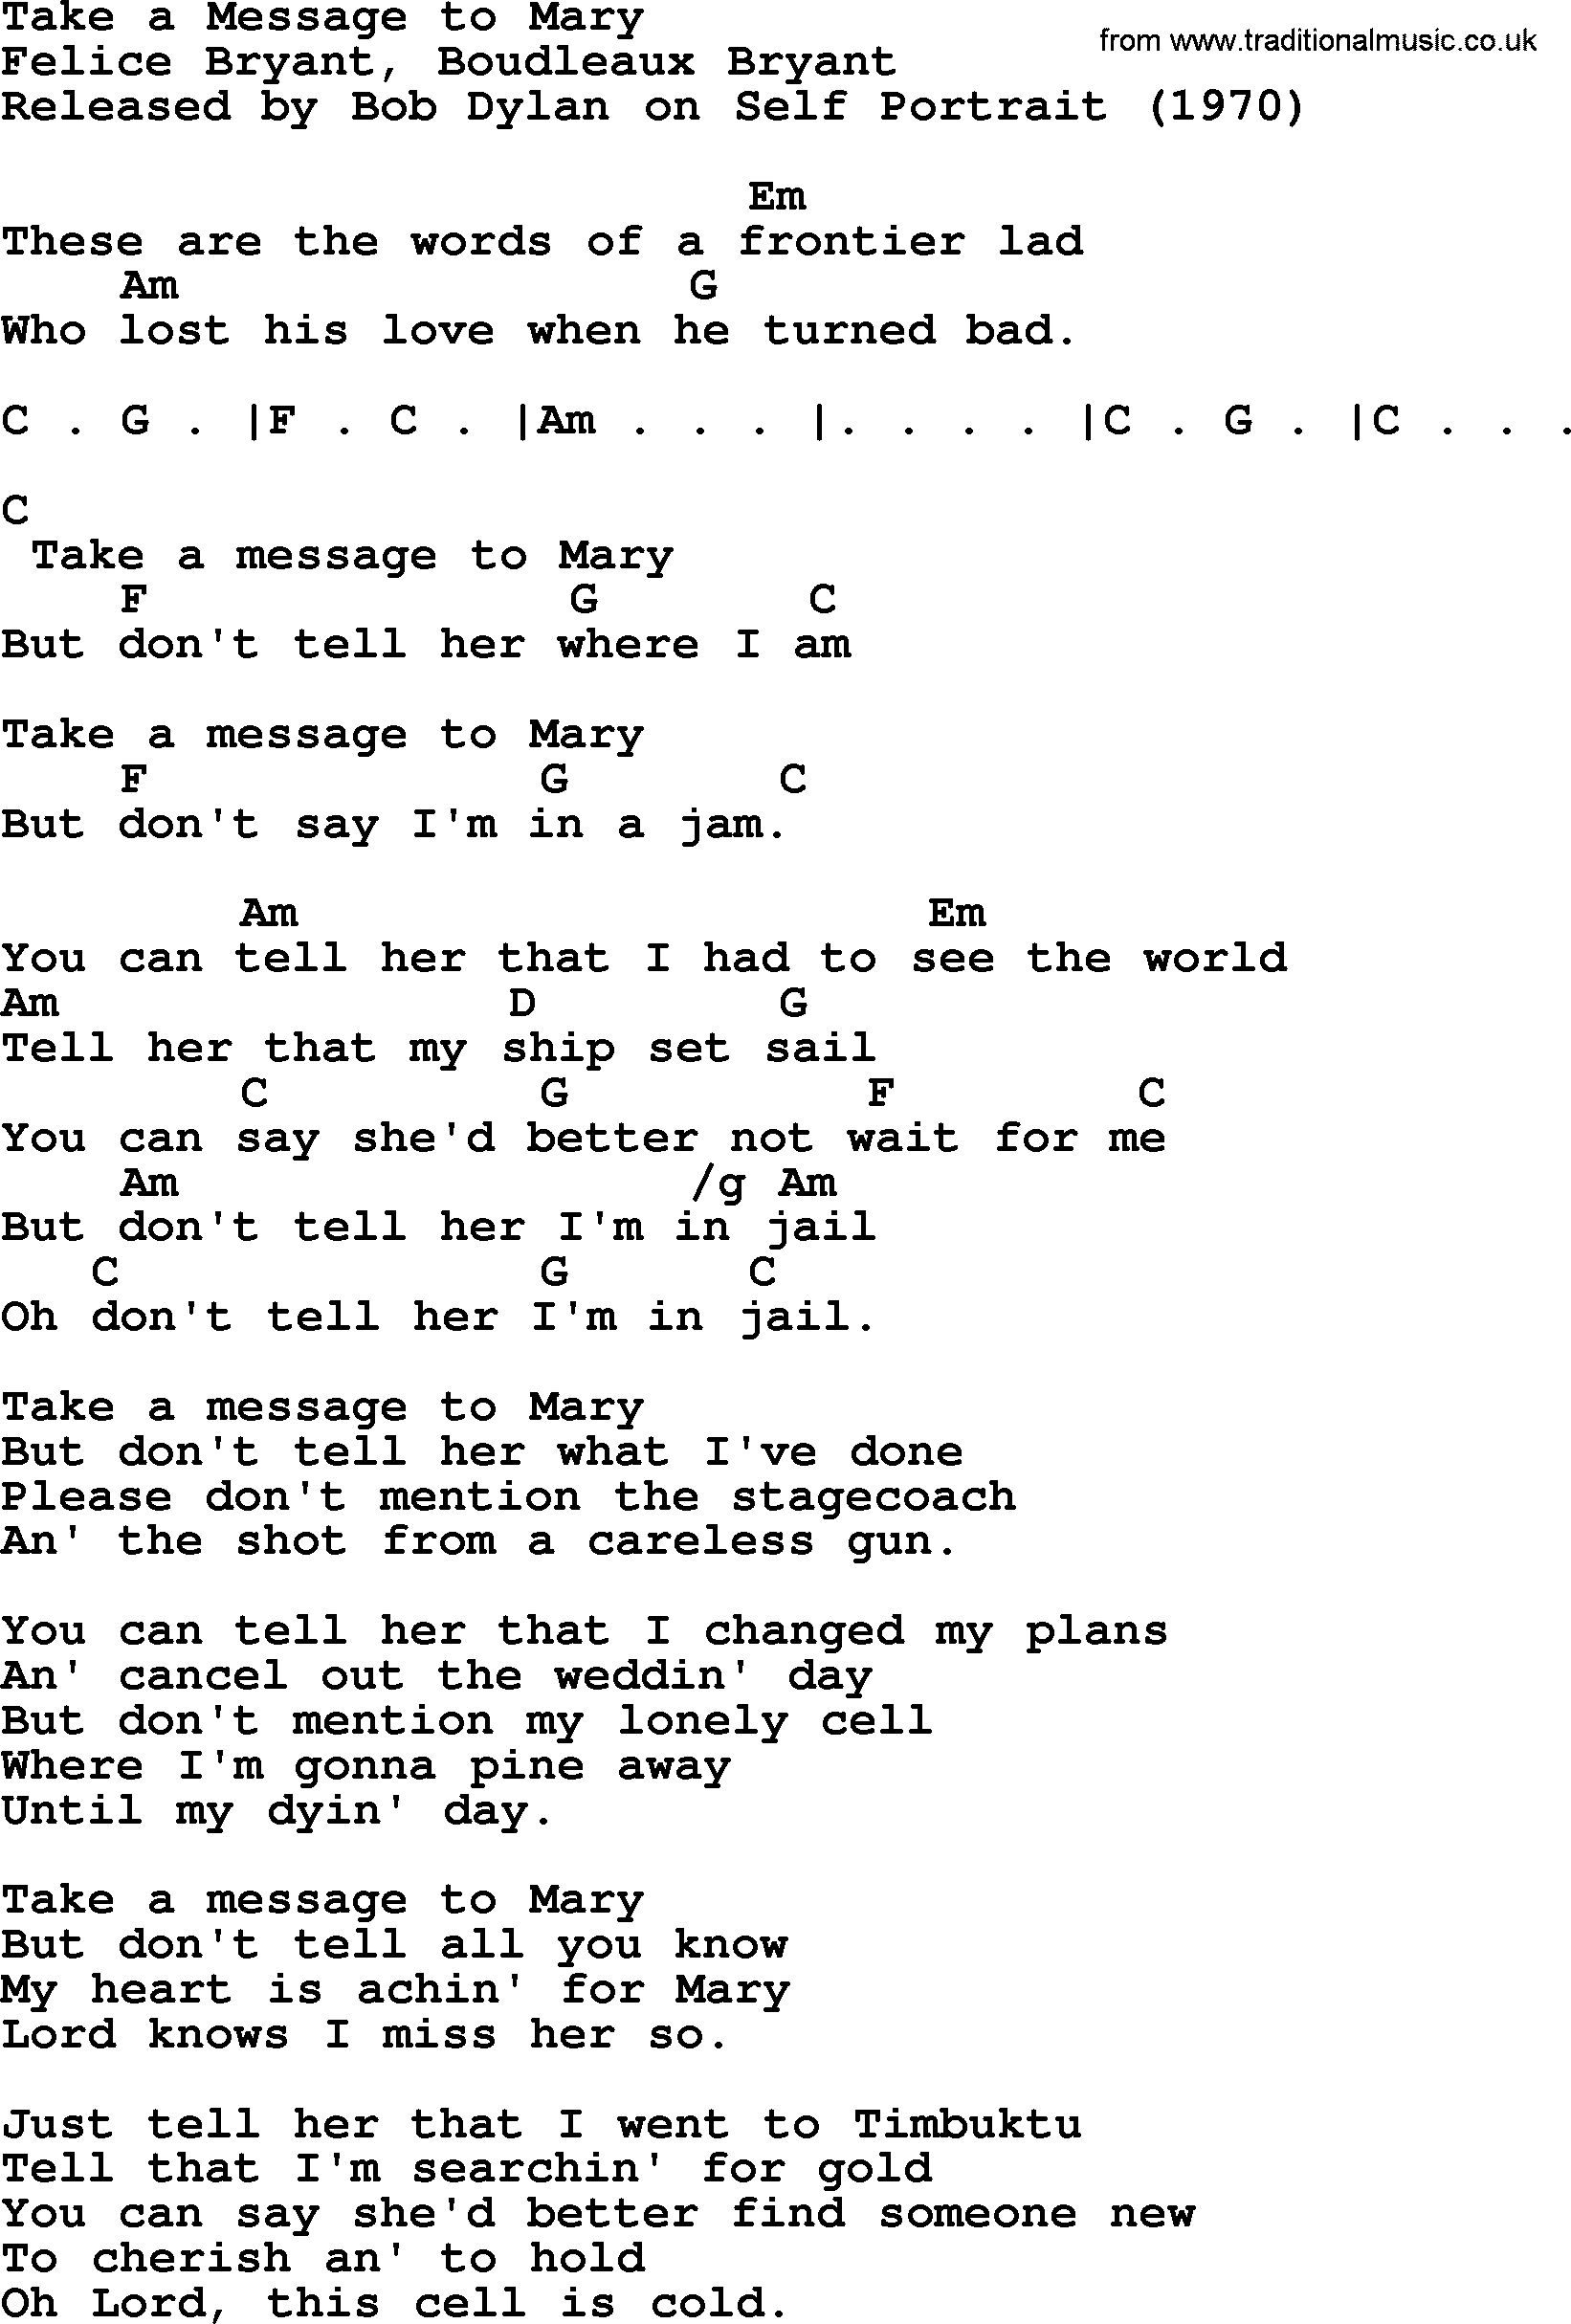 Bob Dylan song, lyrics with chords - Take a Message to Mary